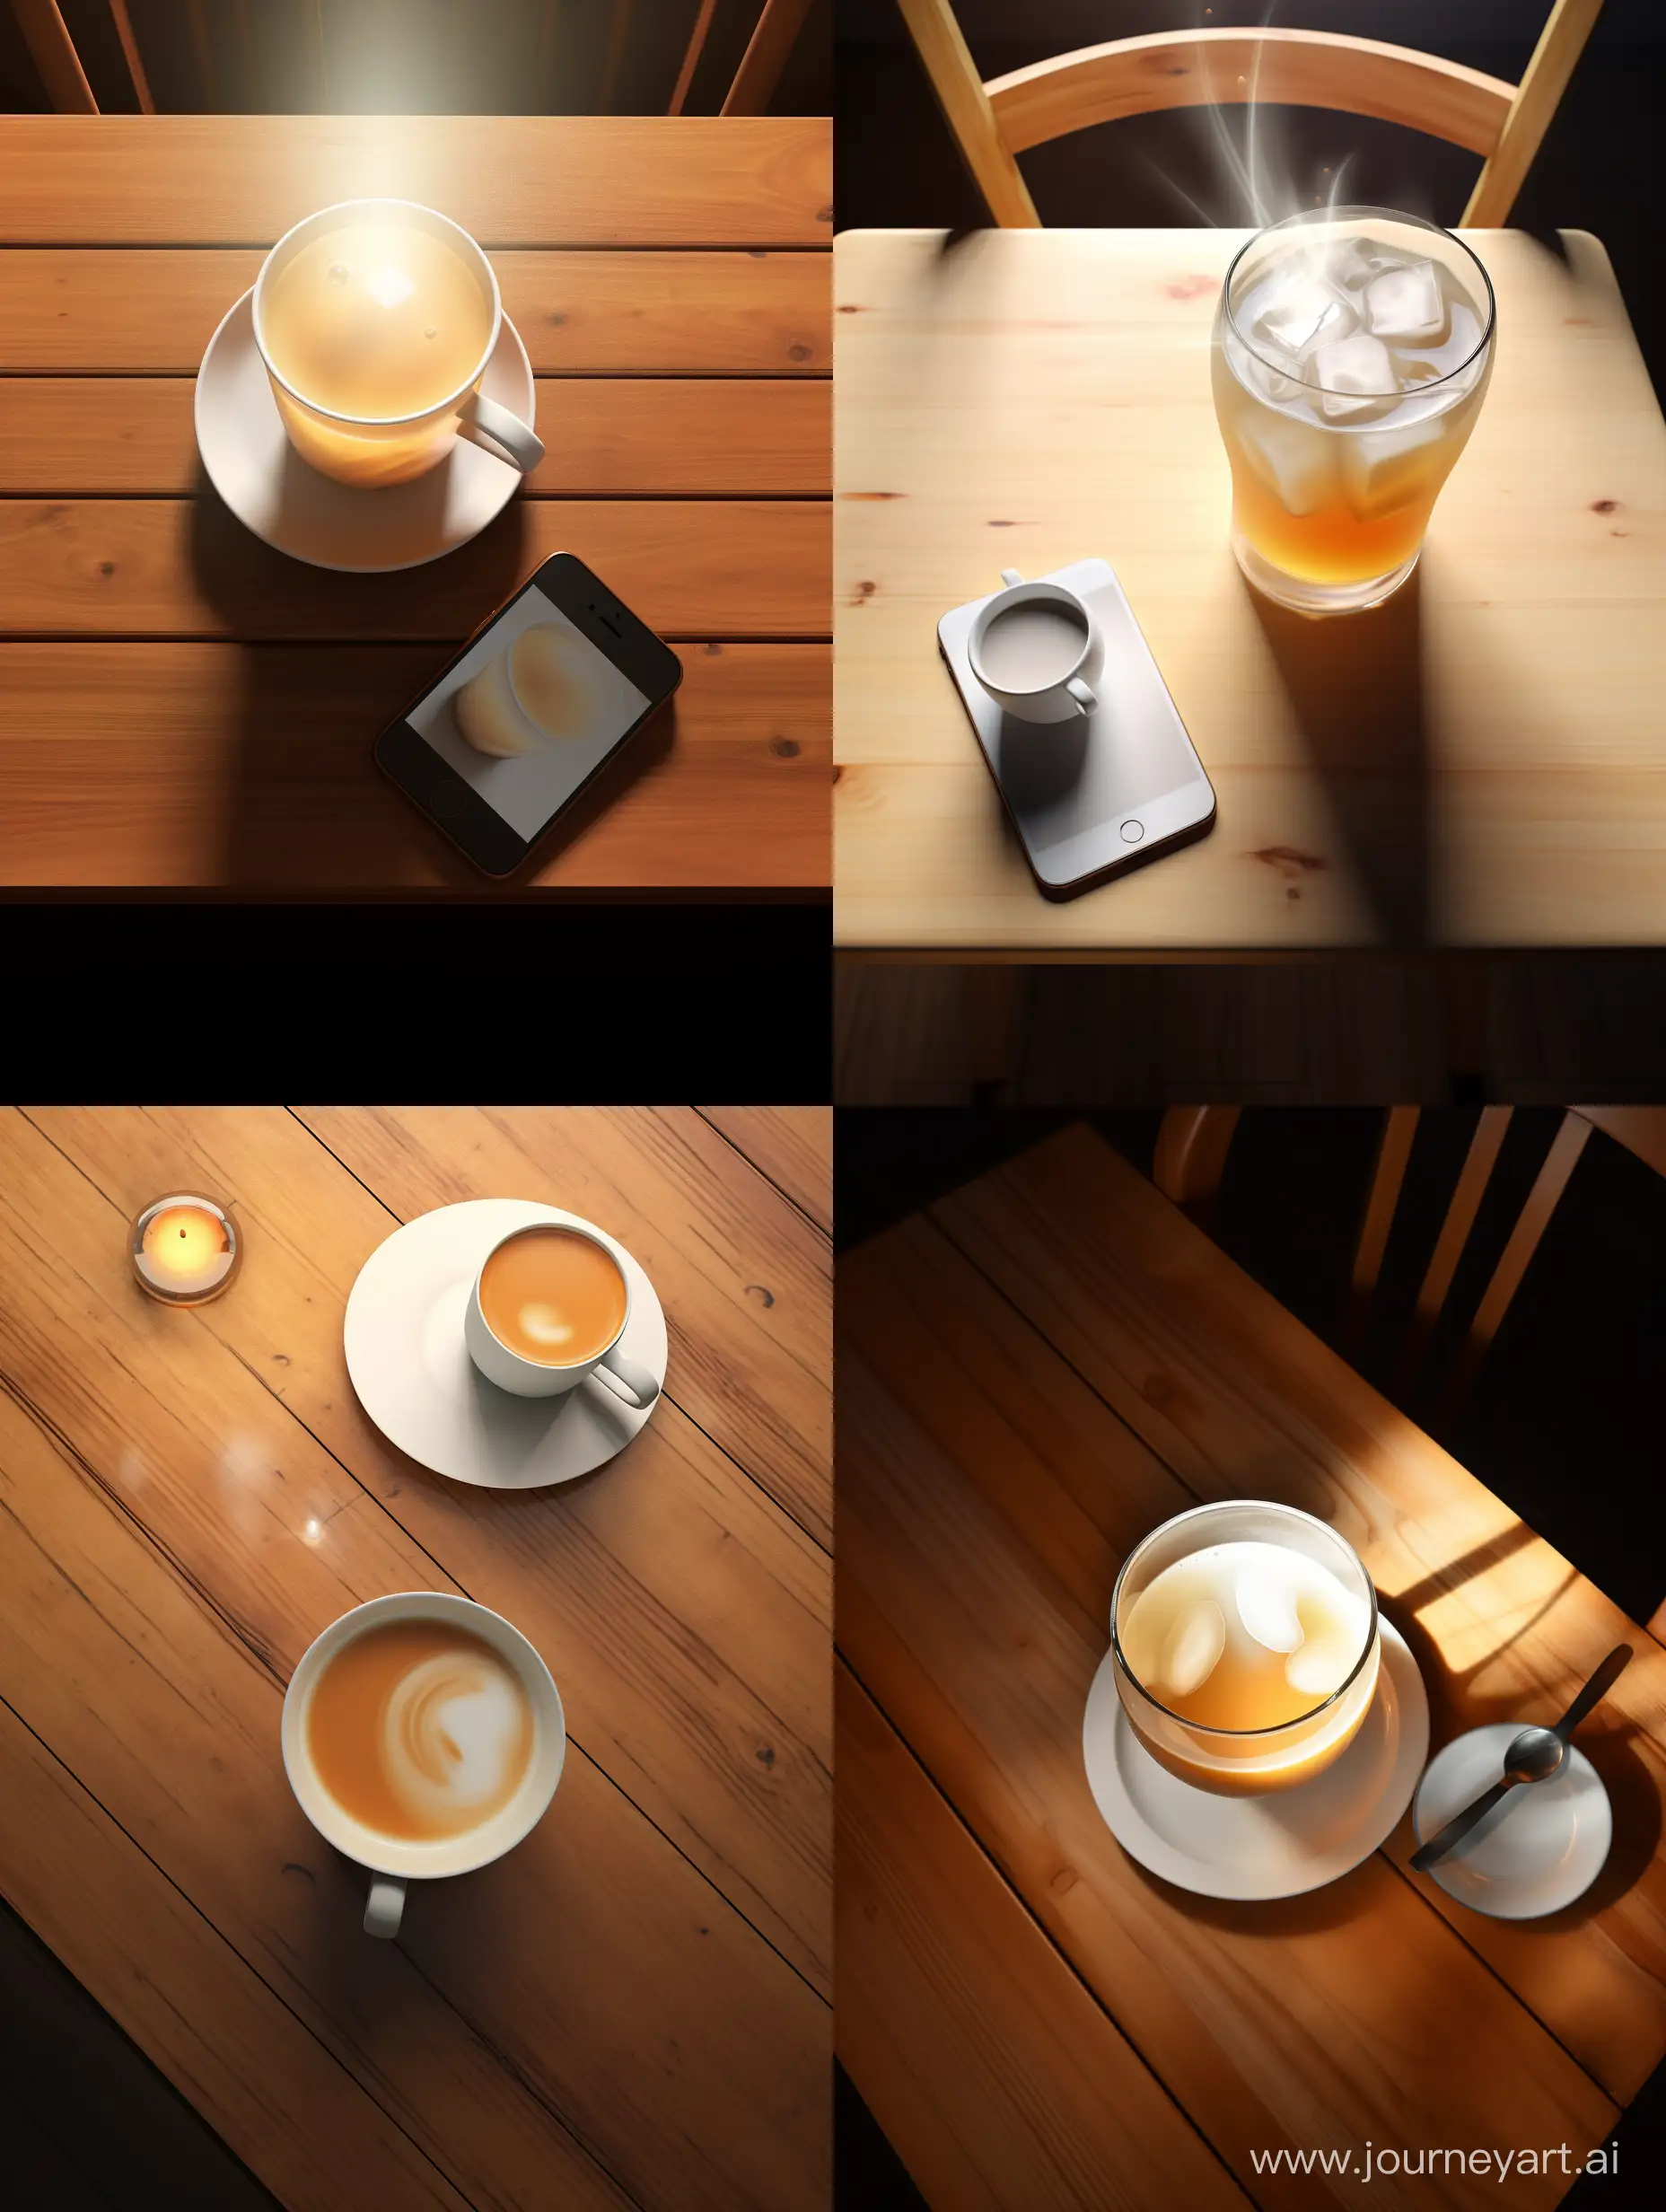 A phone photo of a cup of tea Made of glass and showing milk tea inside, above a wooden table and lighting falling on the cup and table, ultra-realistic. --s 0 --style raw